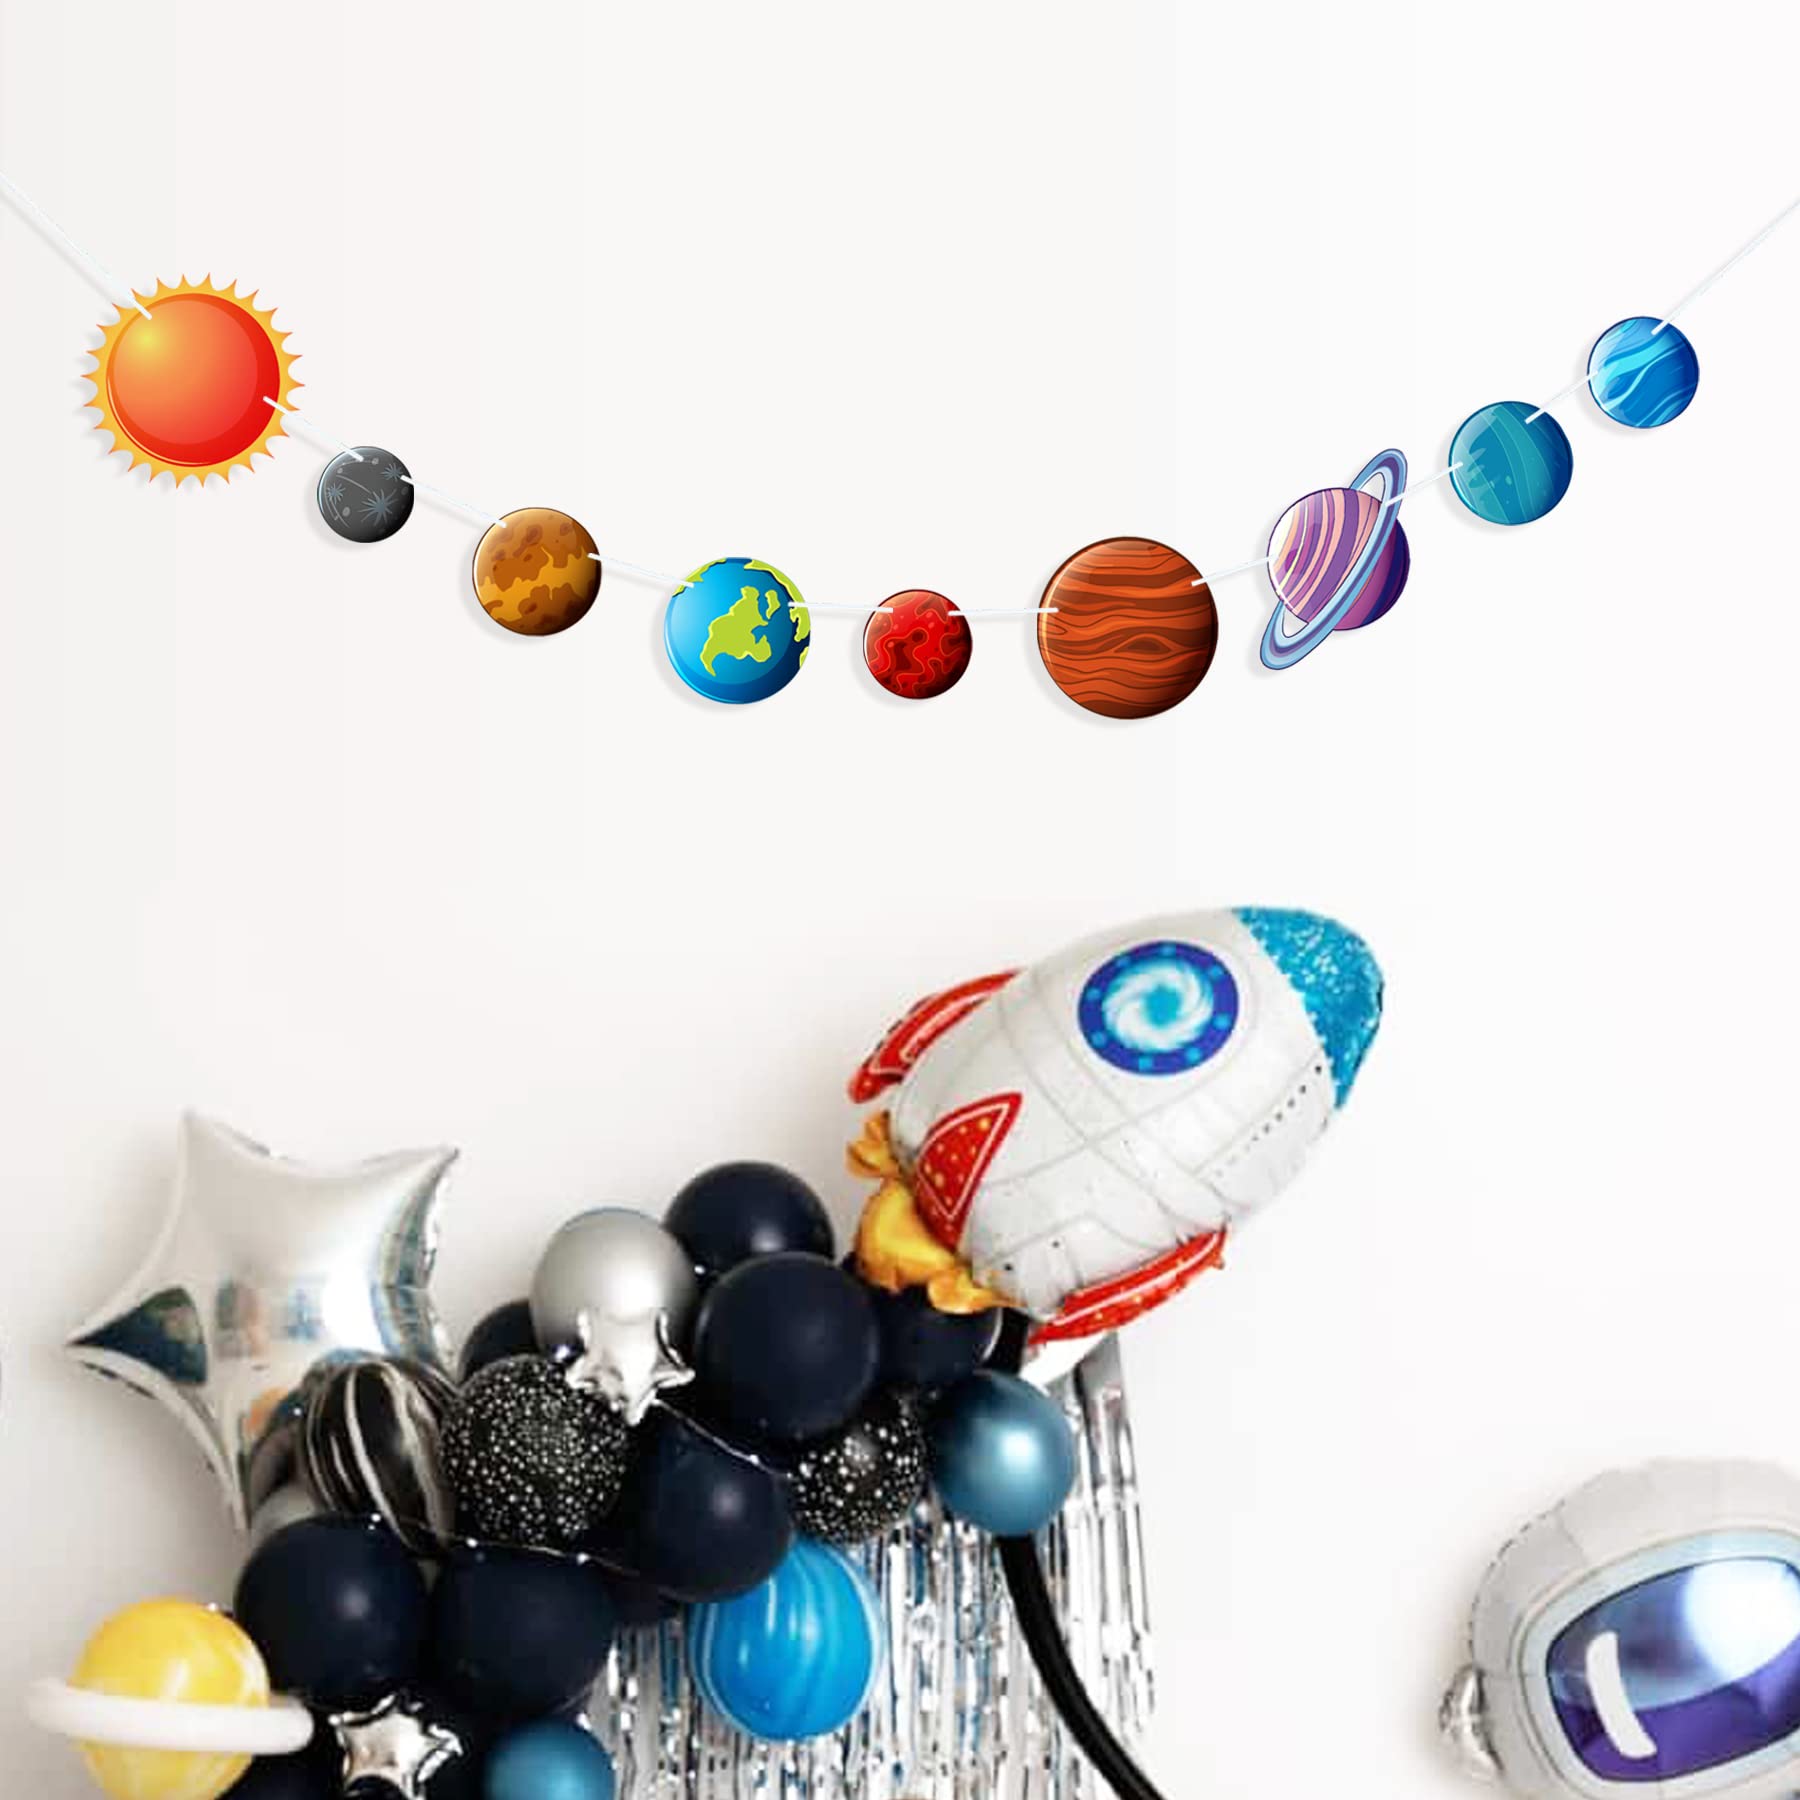 Uniwish Space Banner 9 Pieces Solar System Planets Hanging Paper Garland Outer Space Themed Party Decorations Kids Birthday Party Supplies Photo Backdrop